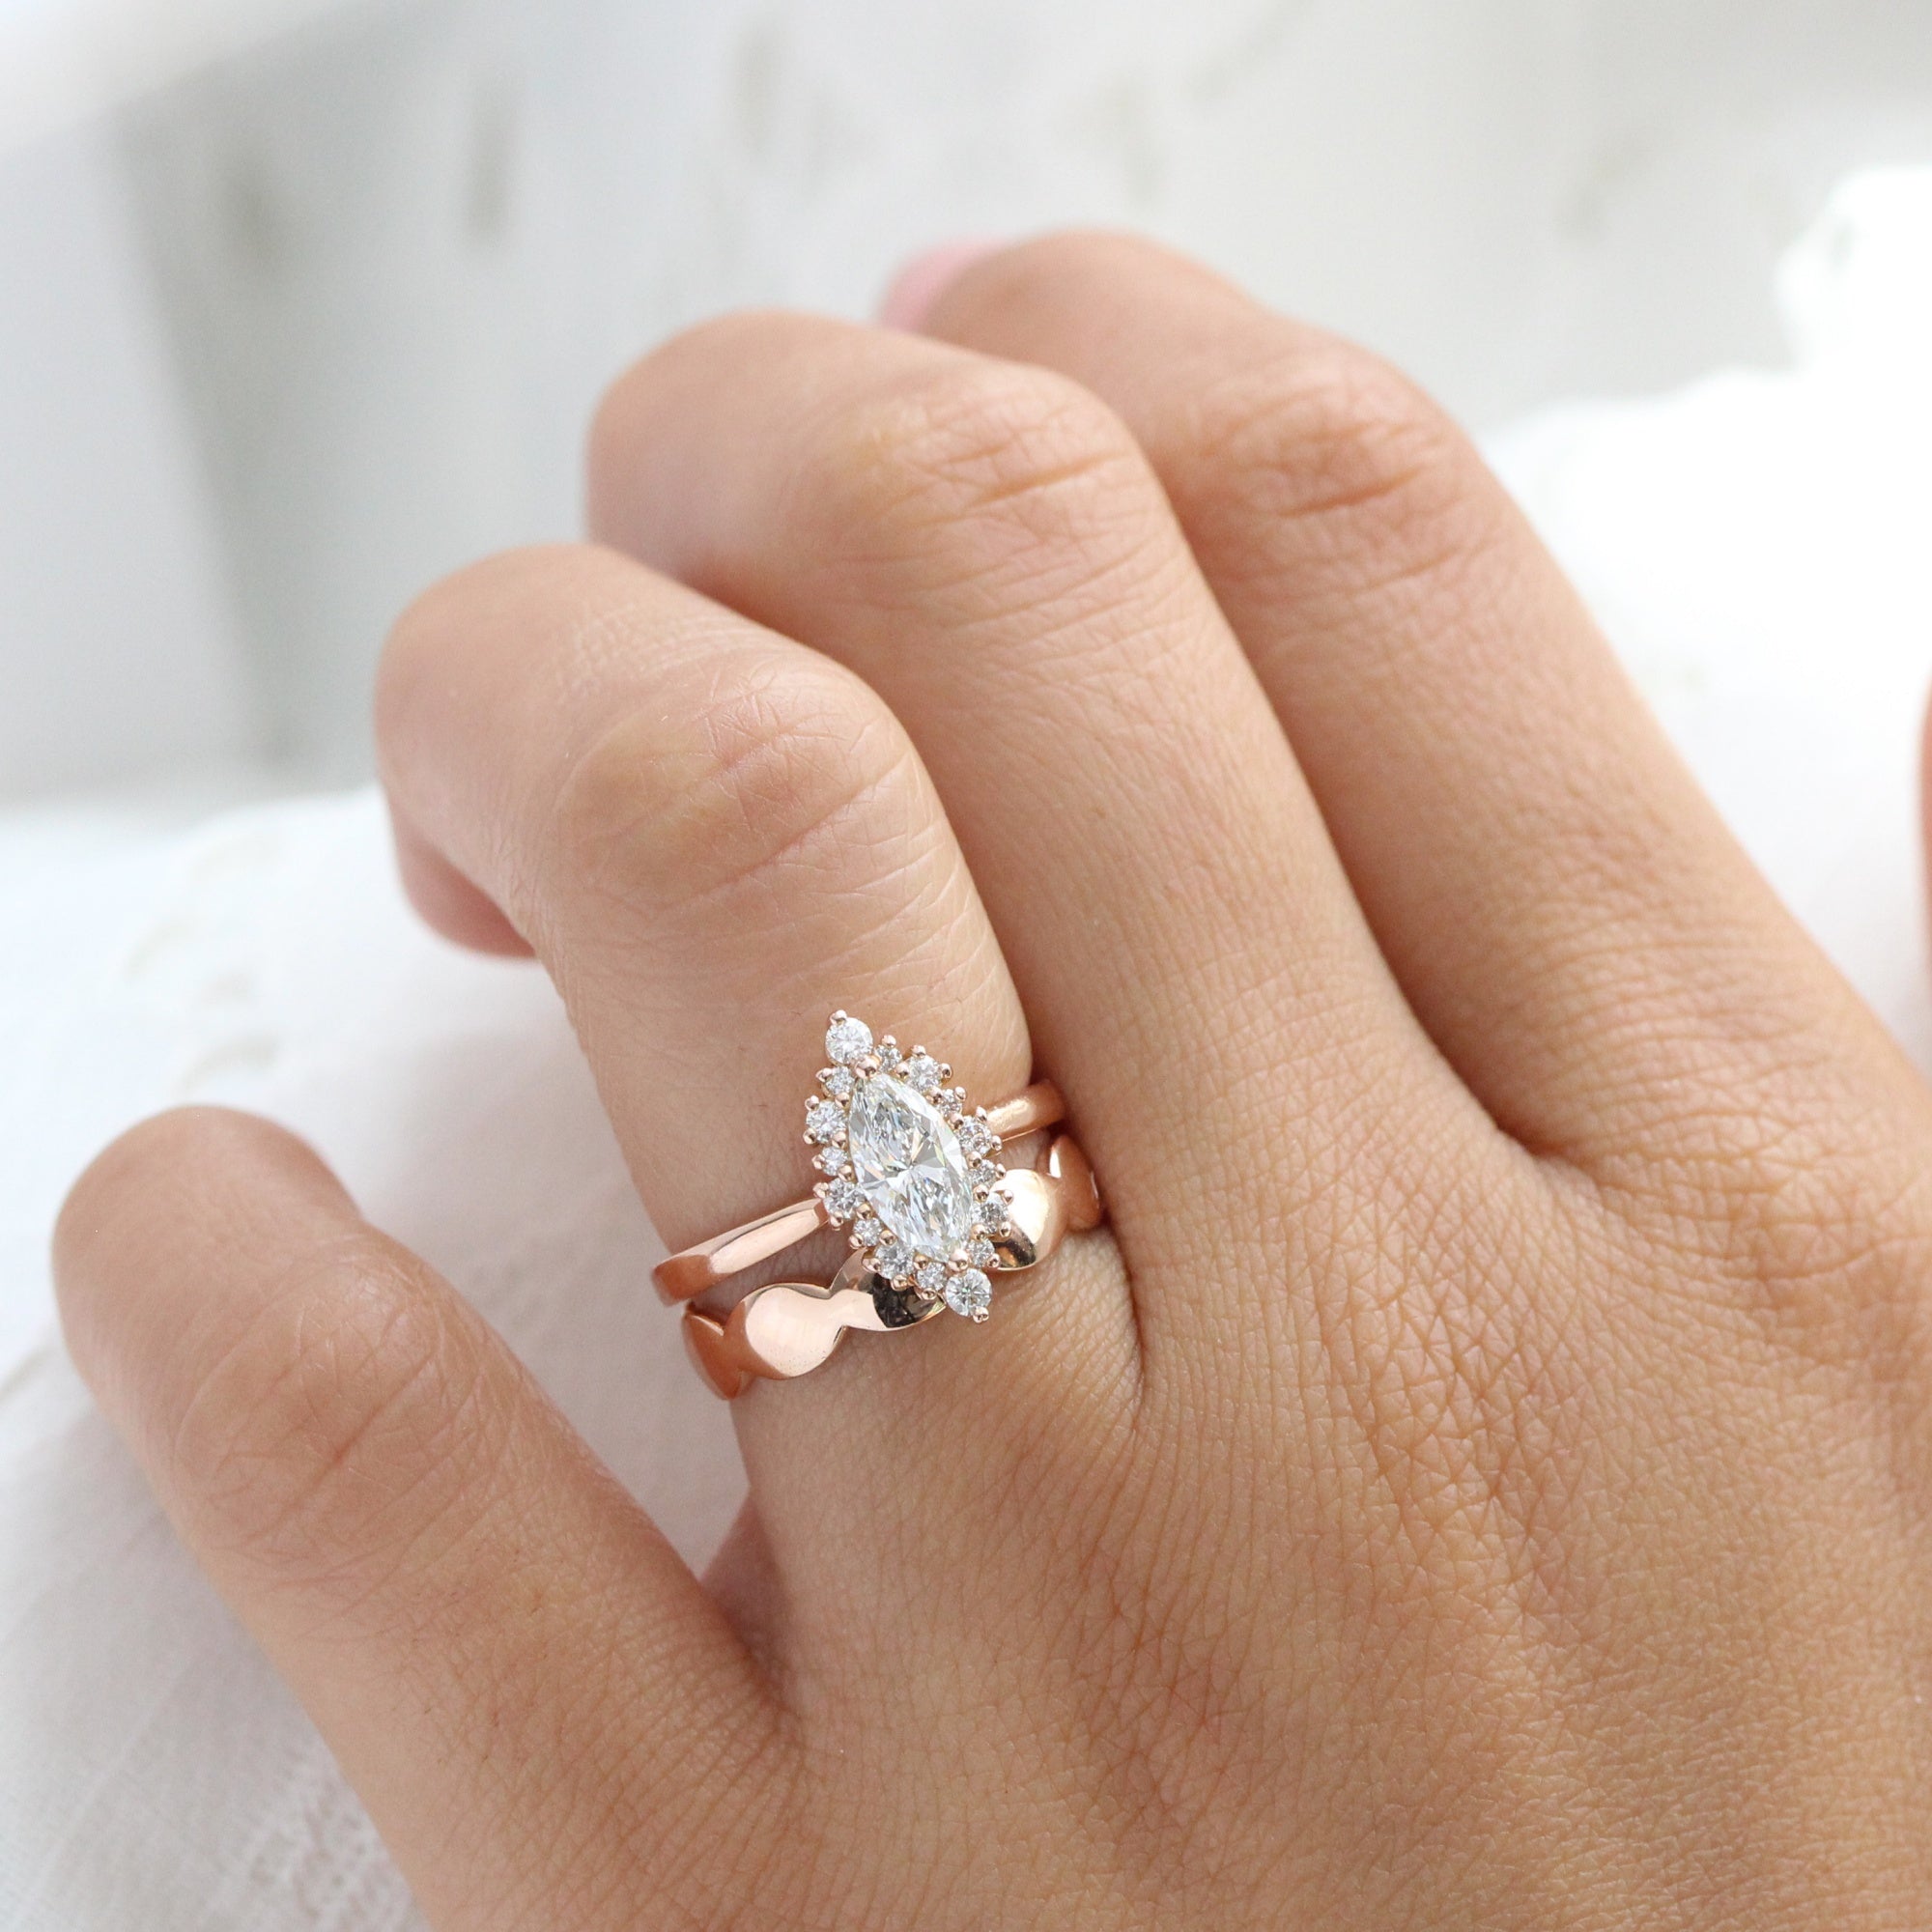 The engagement ring types for every kind of bride